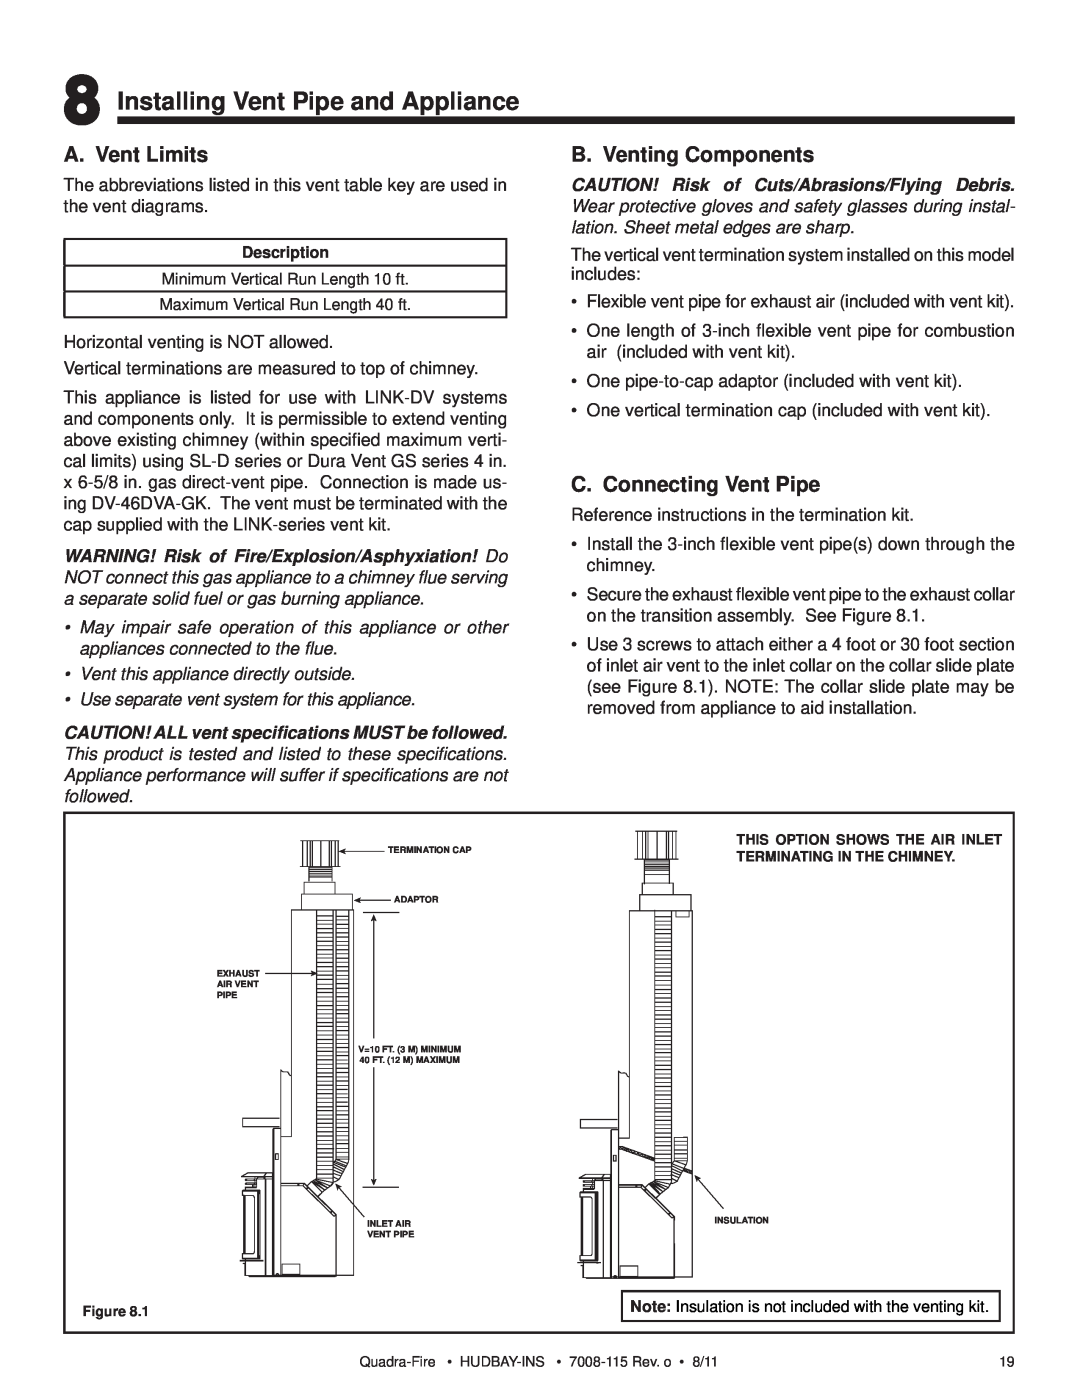 Quadra-Fire 7008-115 Installing Vent Pipe and Appliance, A. Vent Limits, B. Venting Components, C. Connecting Vent Pipe 